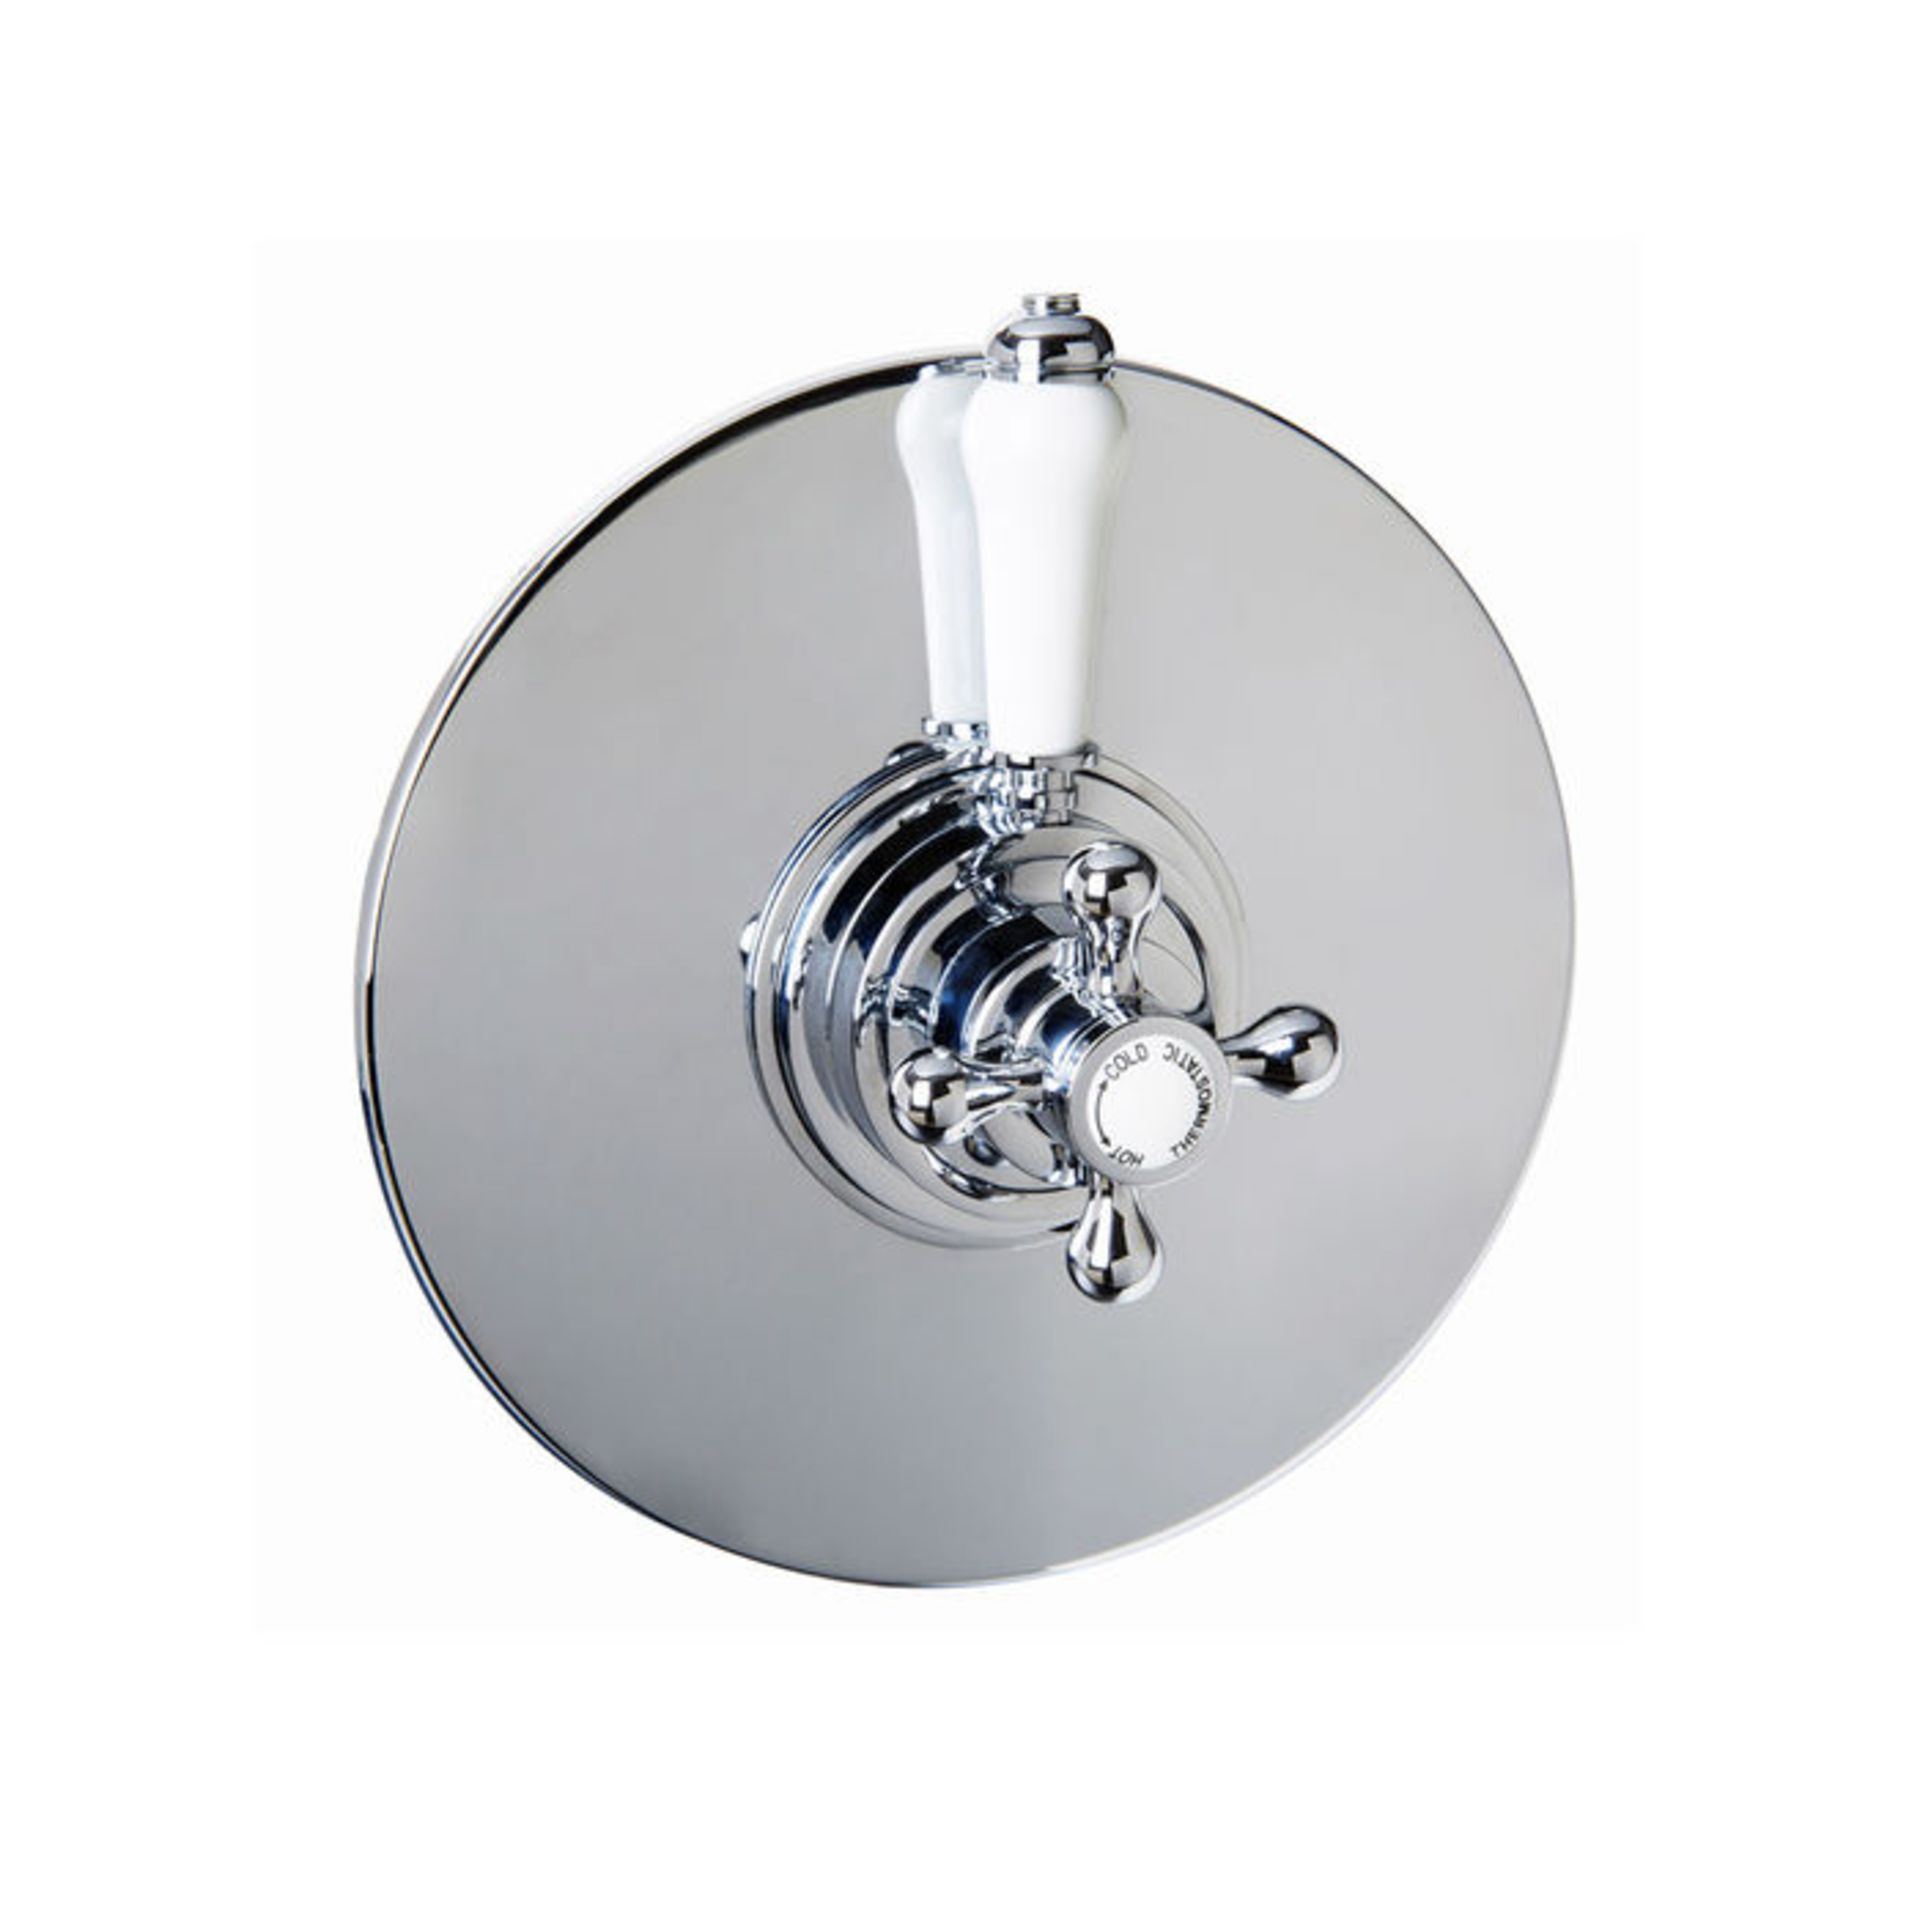 (AL253) Traditional Concentric Concealed Thermostatic Valve. Chrome plated solid brass Built in